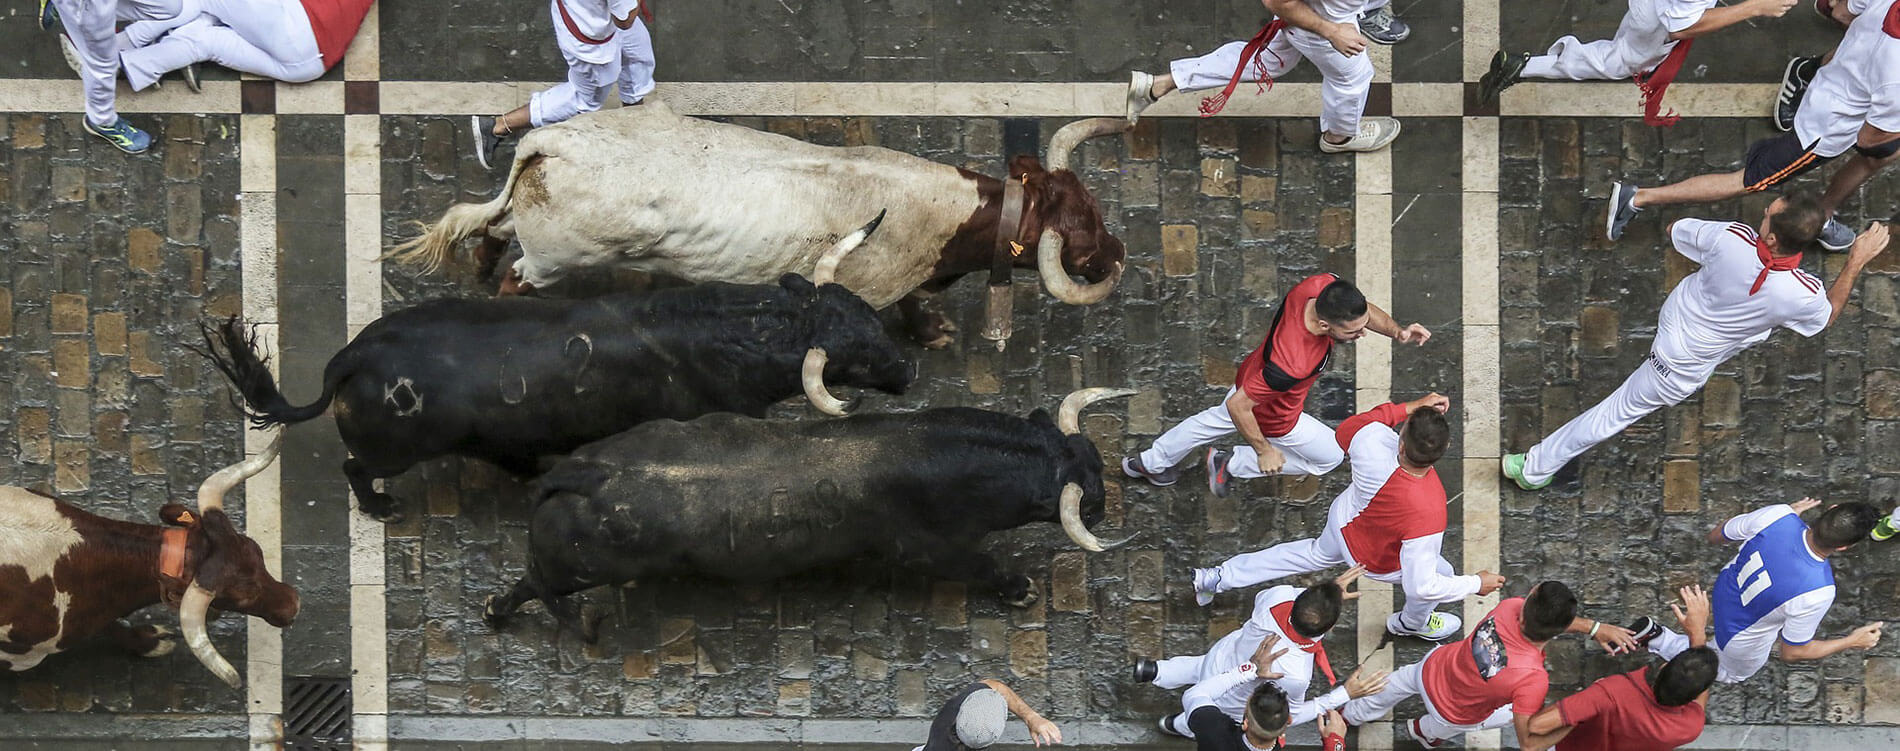 Running of the Bulls Packages TGW Travel Group